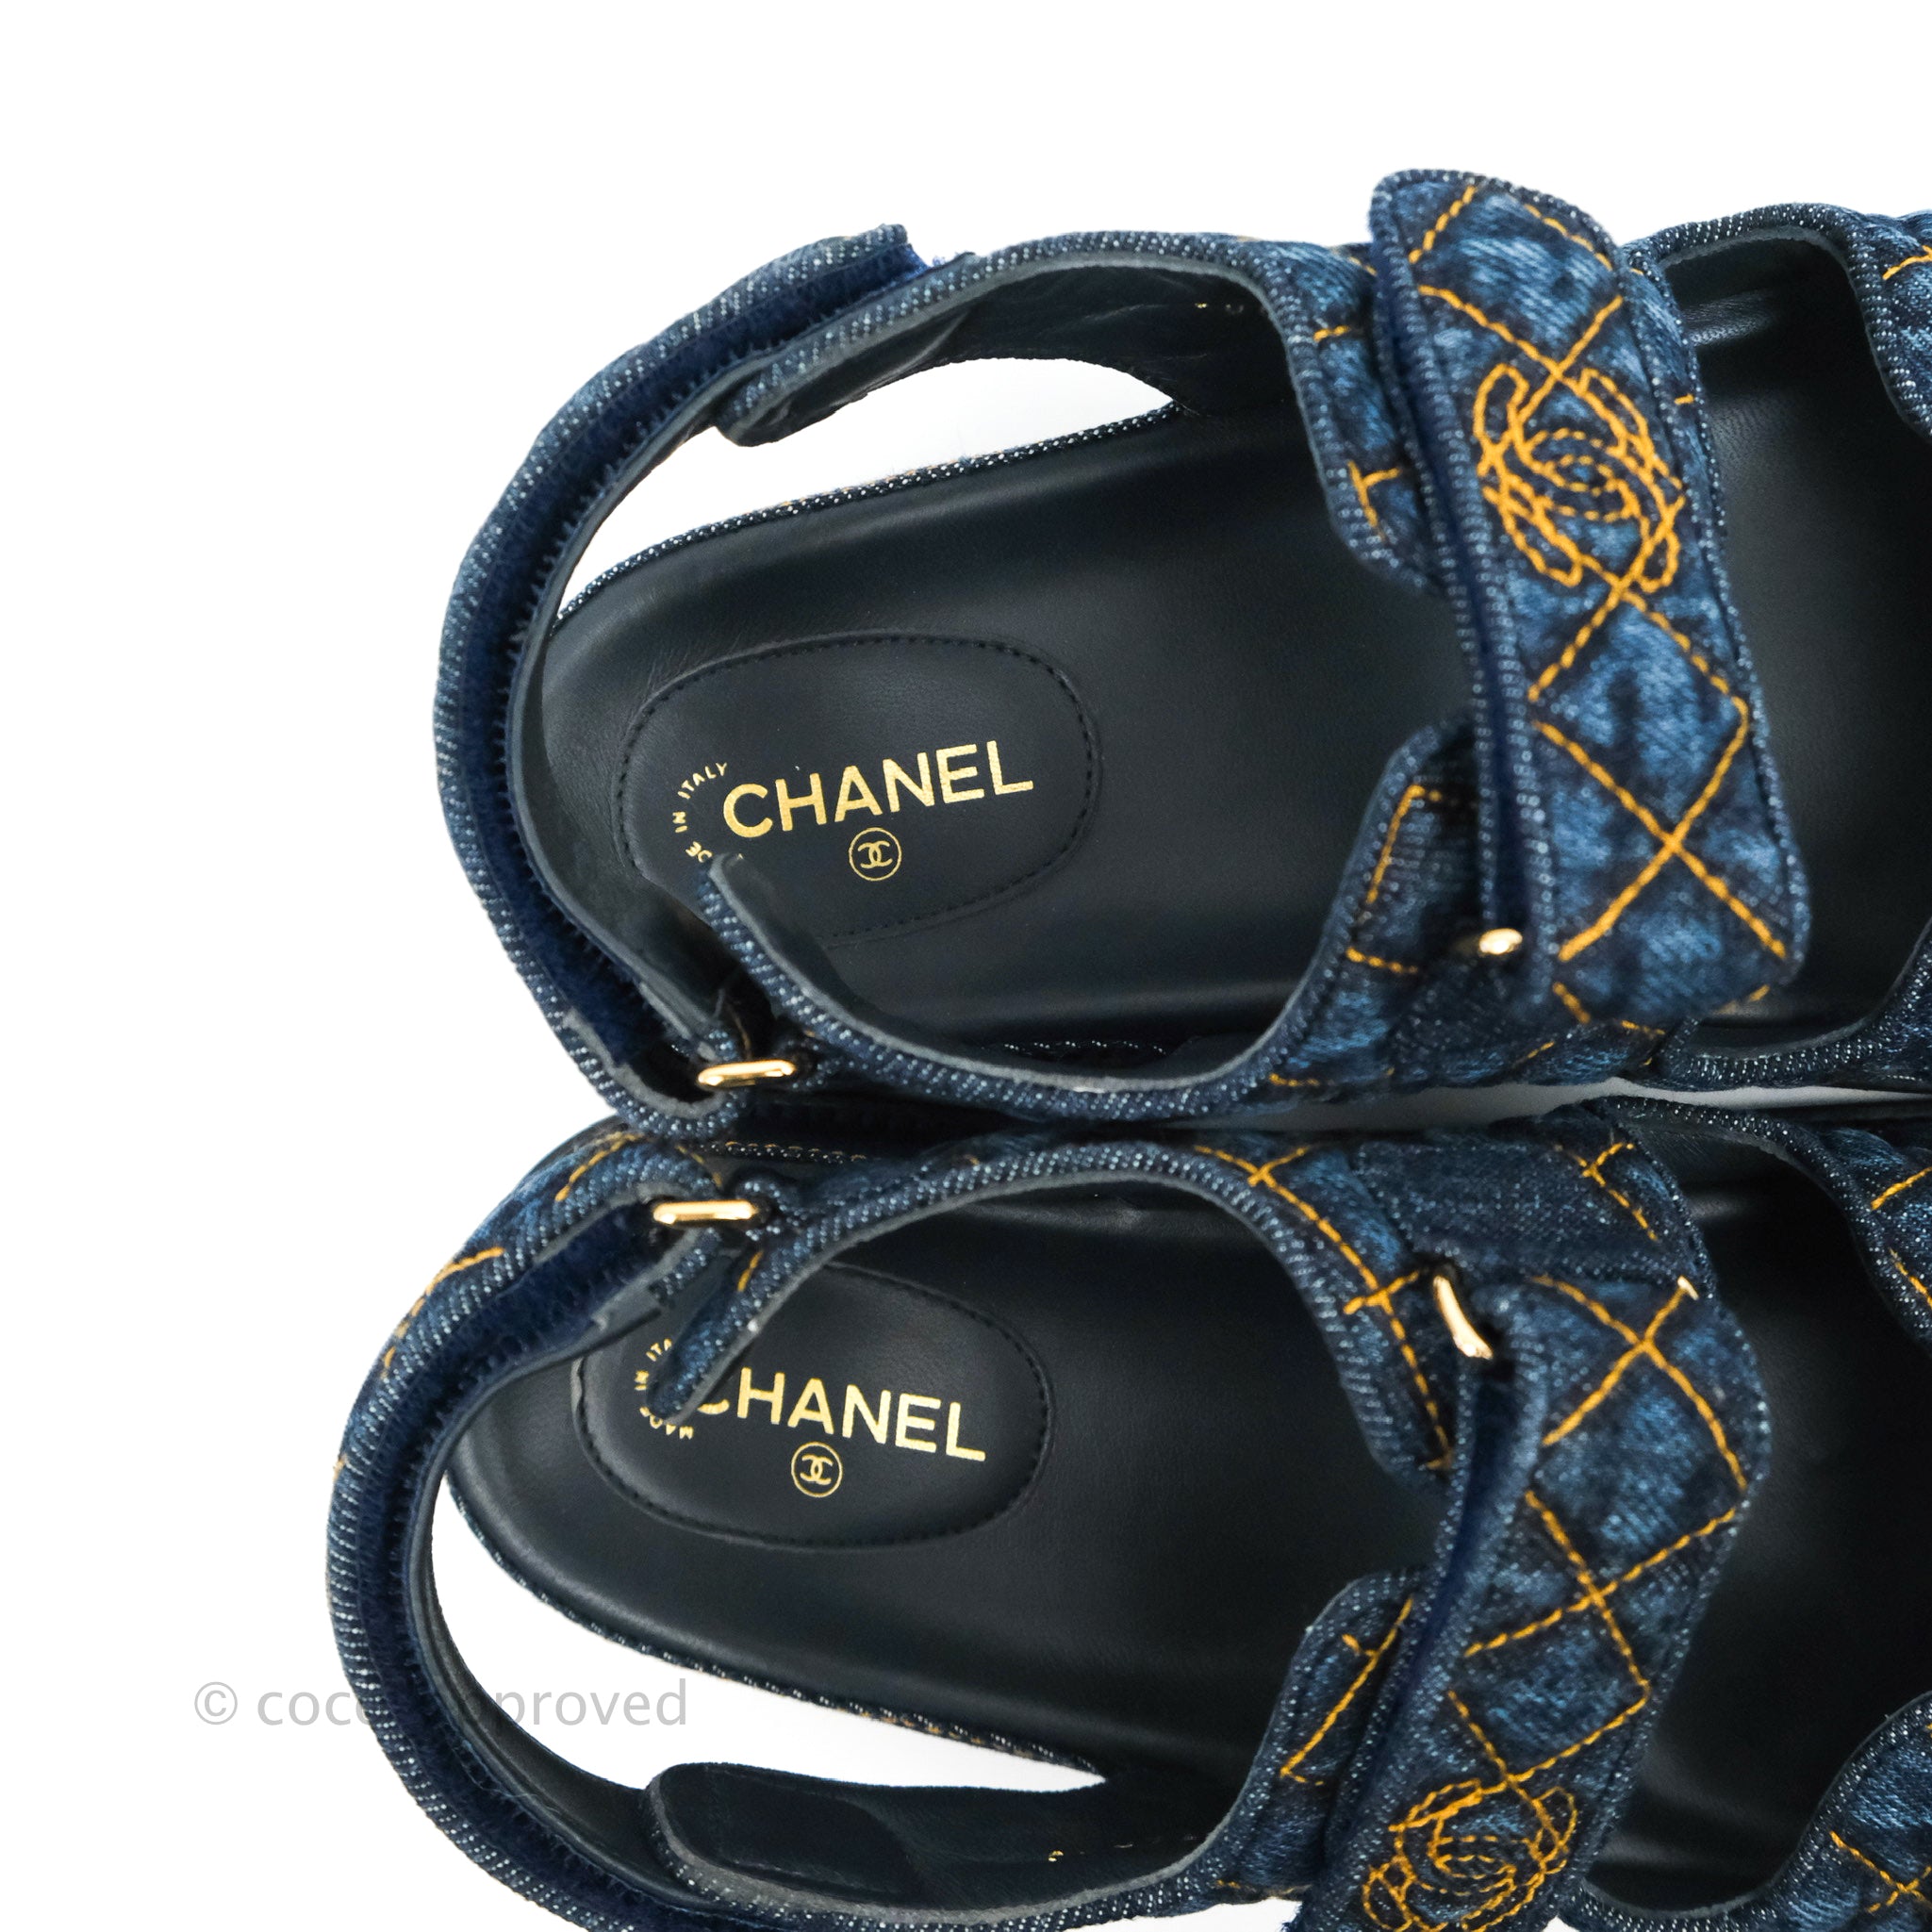 Chanel Denim Dad Sandals Size 38.5 – Coco Approved Studio